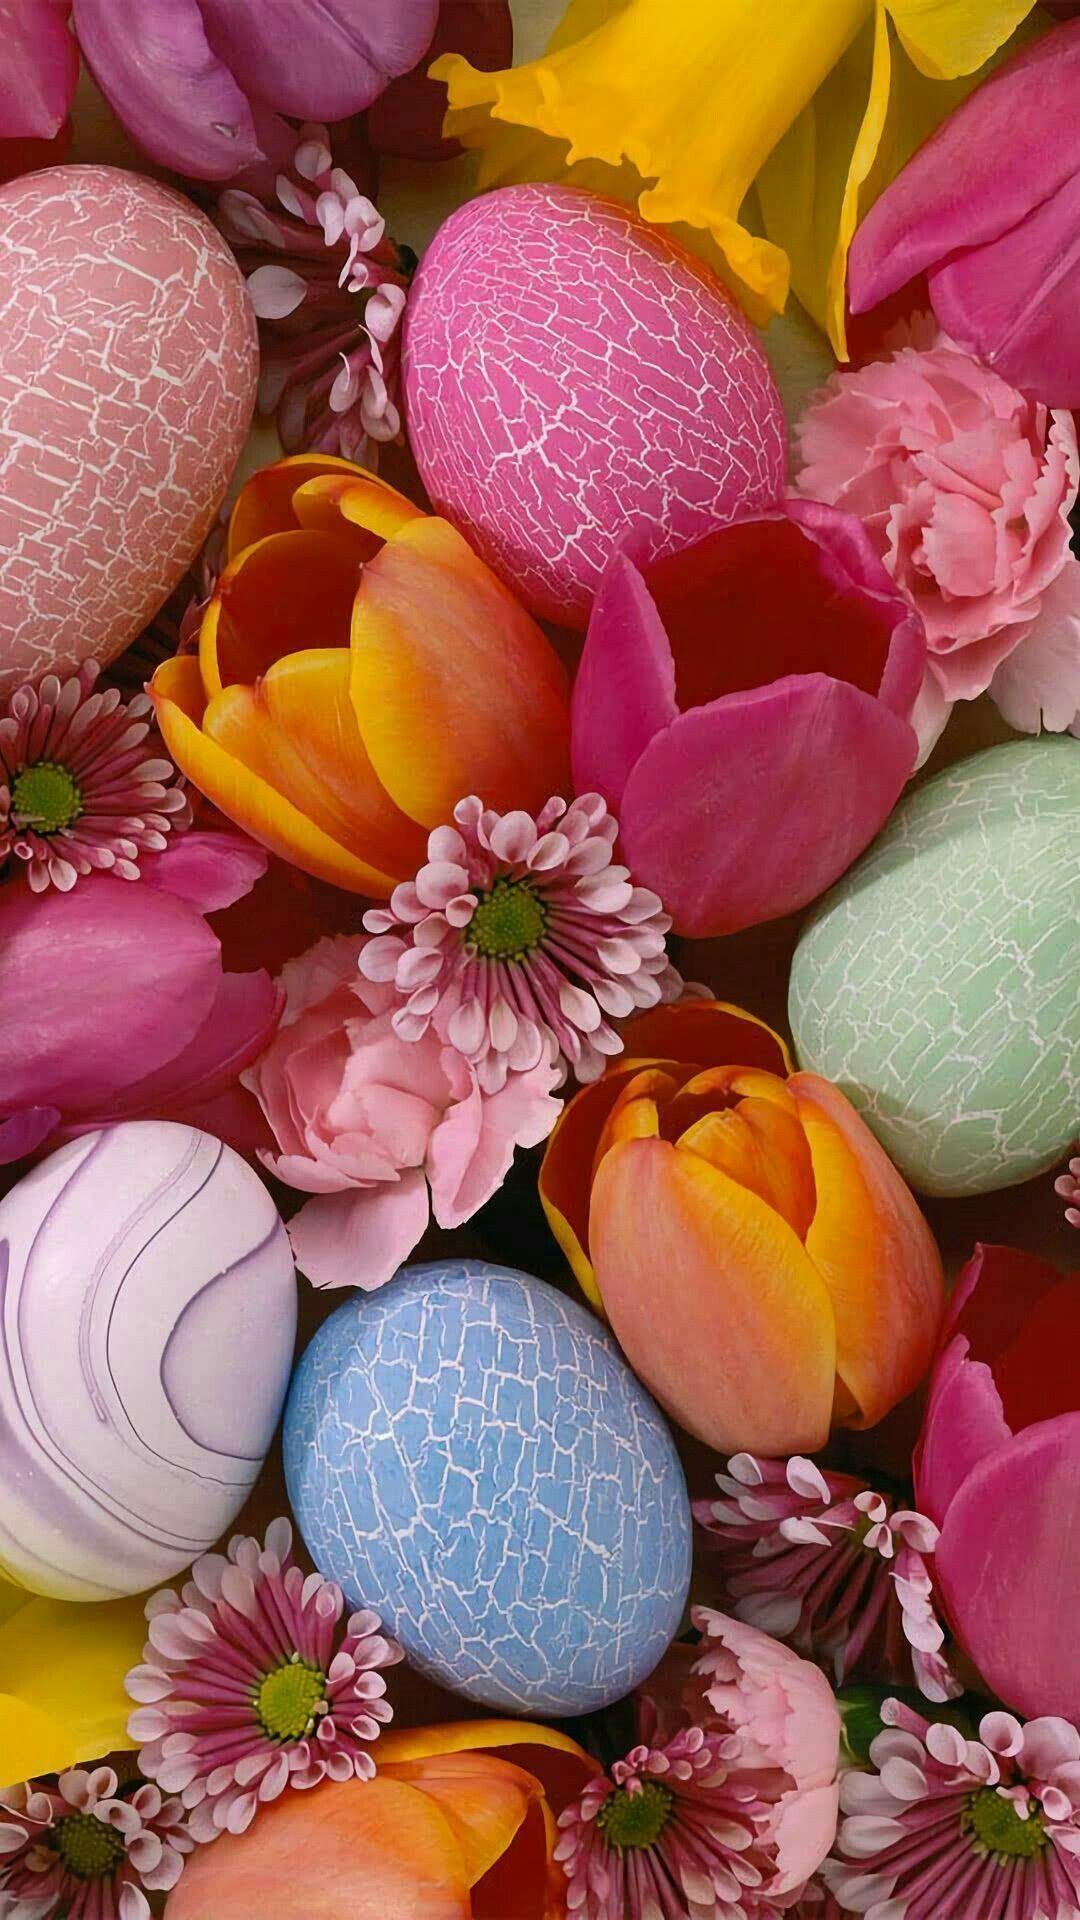 A close up of many colorful eggs and flowers - Easter, egg